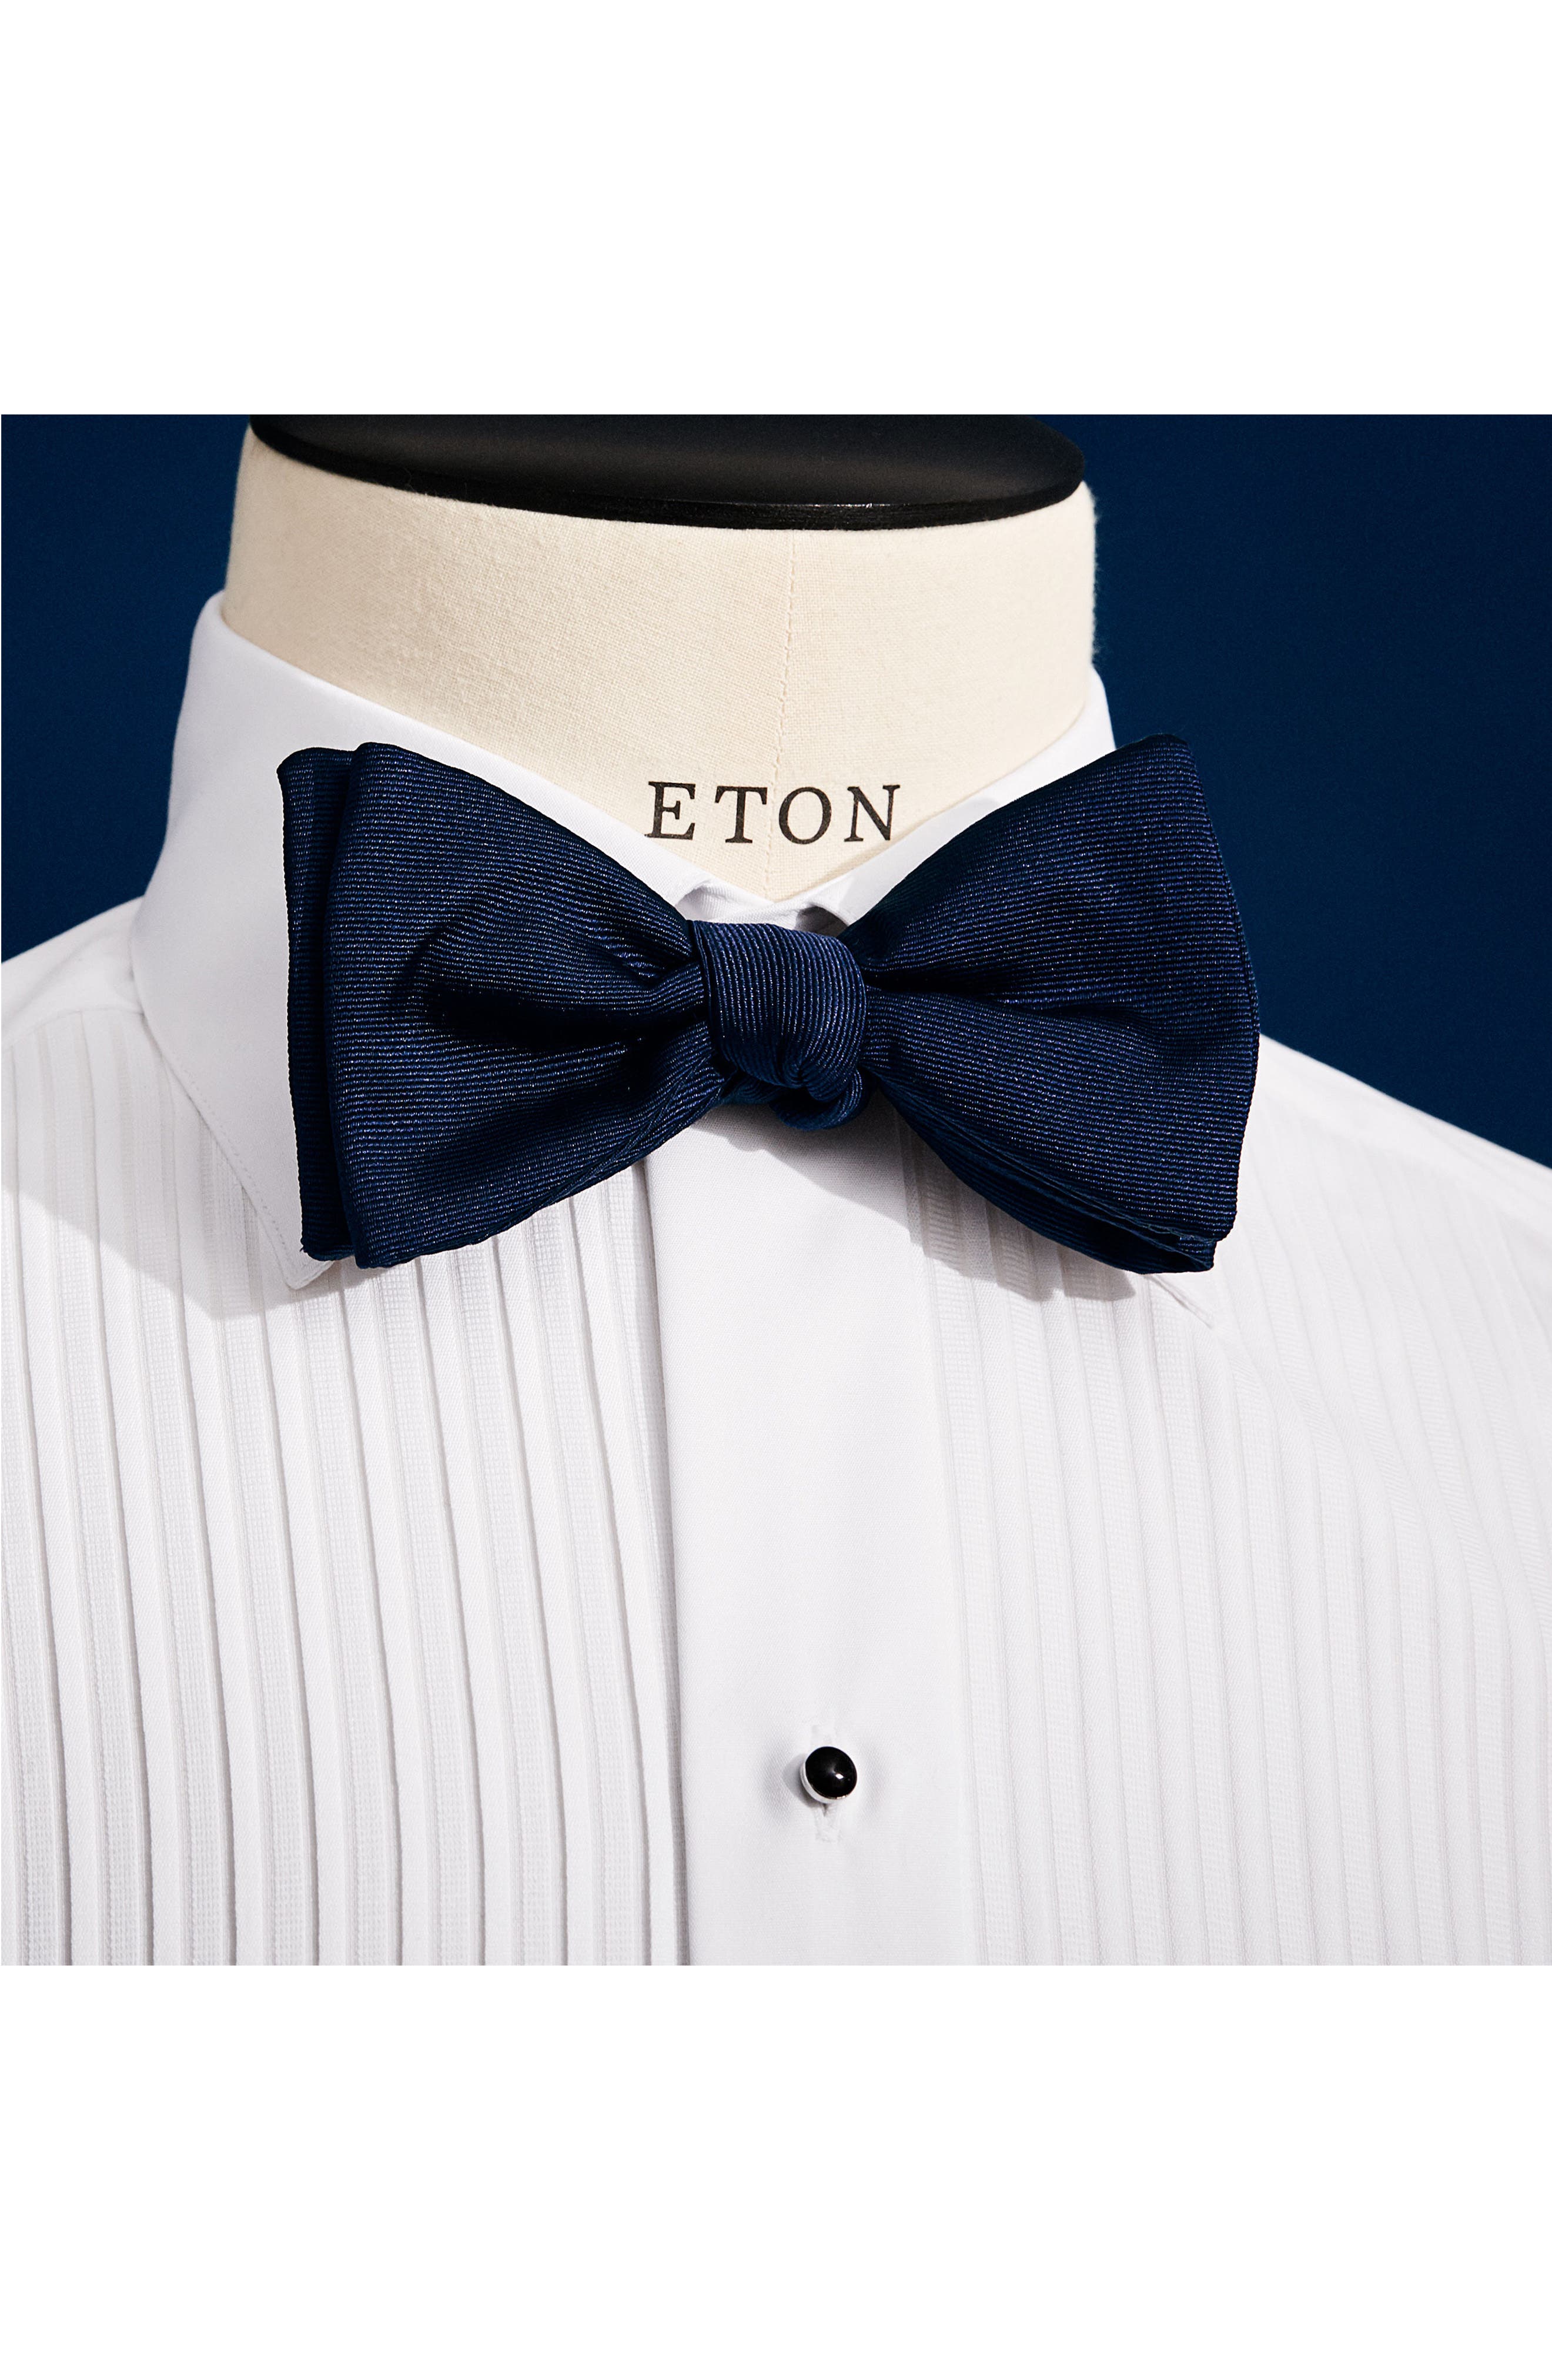 READY SILK BOW TIE WIDE SIZE SILK SEE CUSTOMER COMMENTS WHITE OR BLACK 